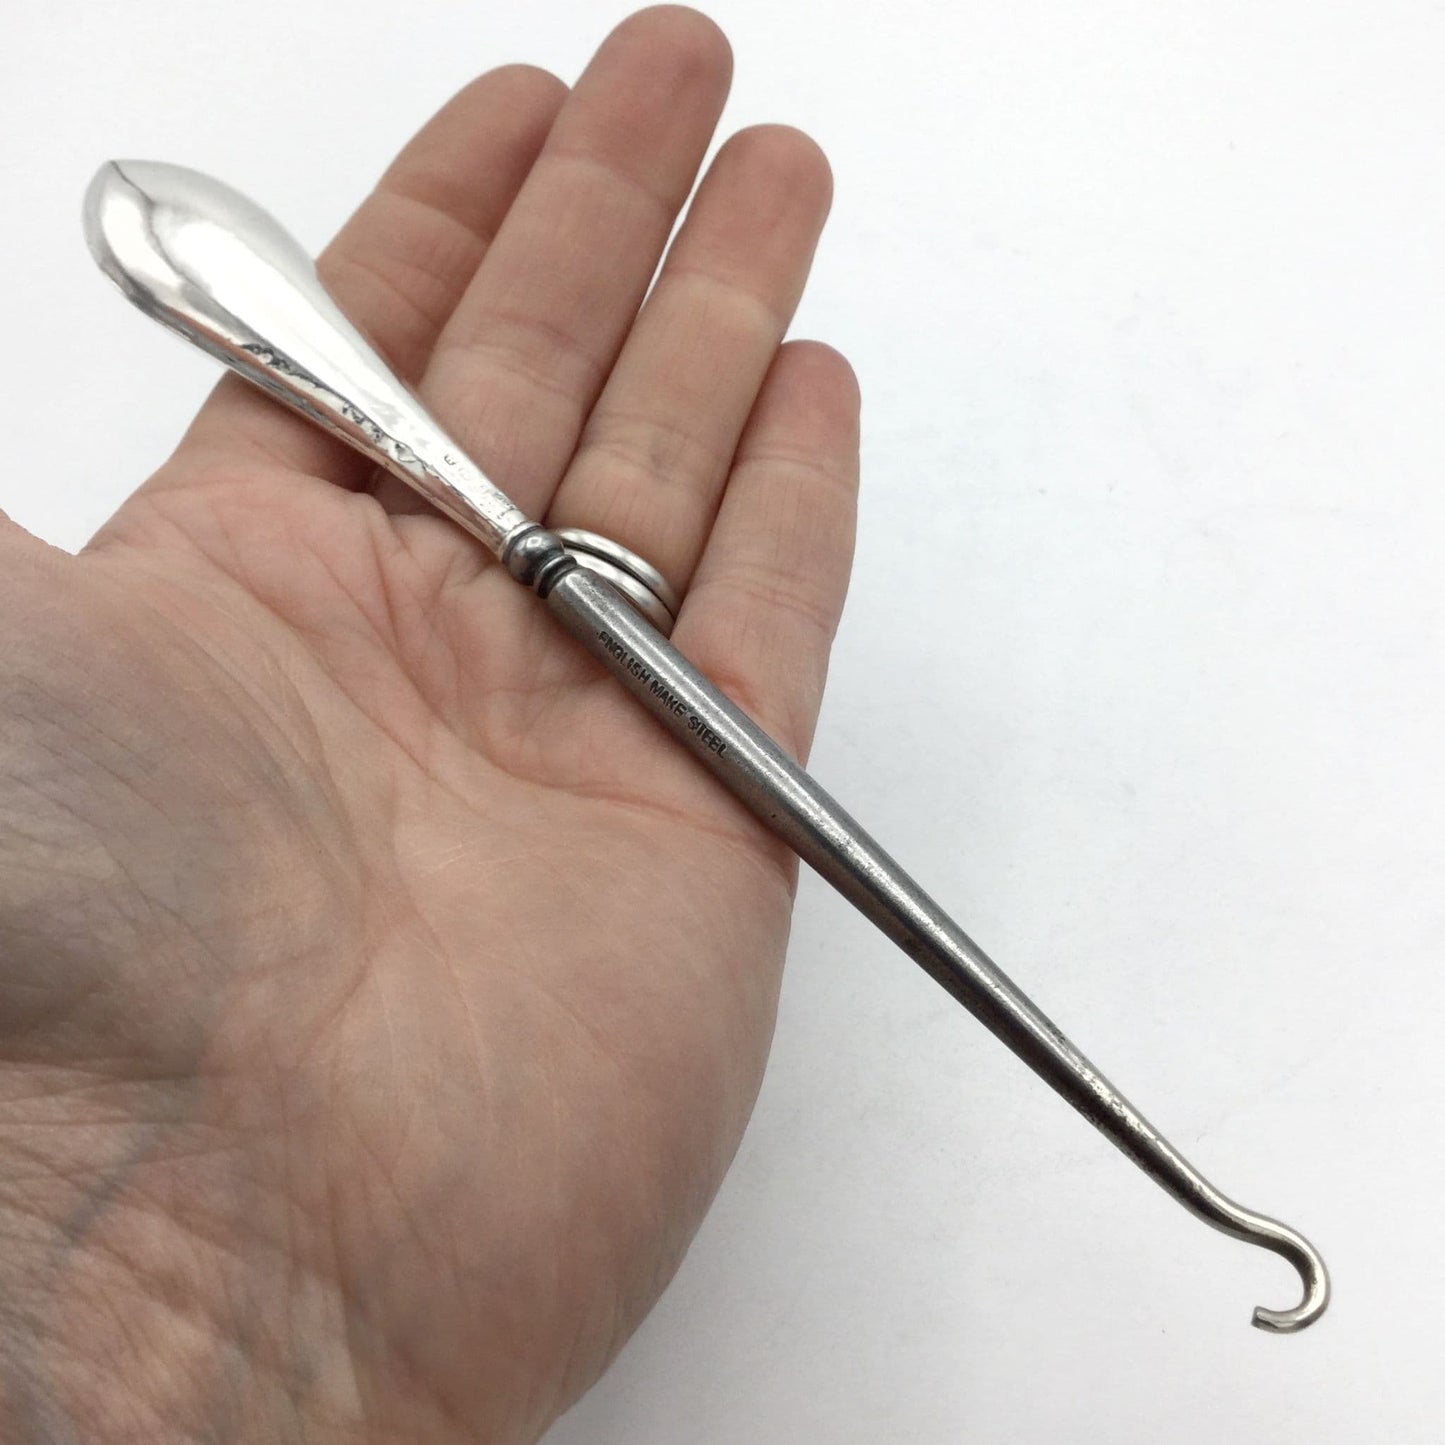 Silver handled button hook with a shiny handle and steel hook held in a hand